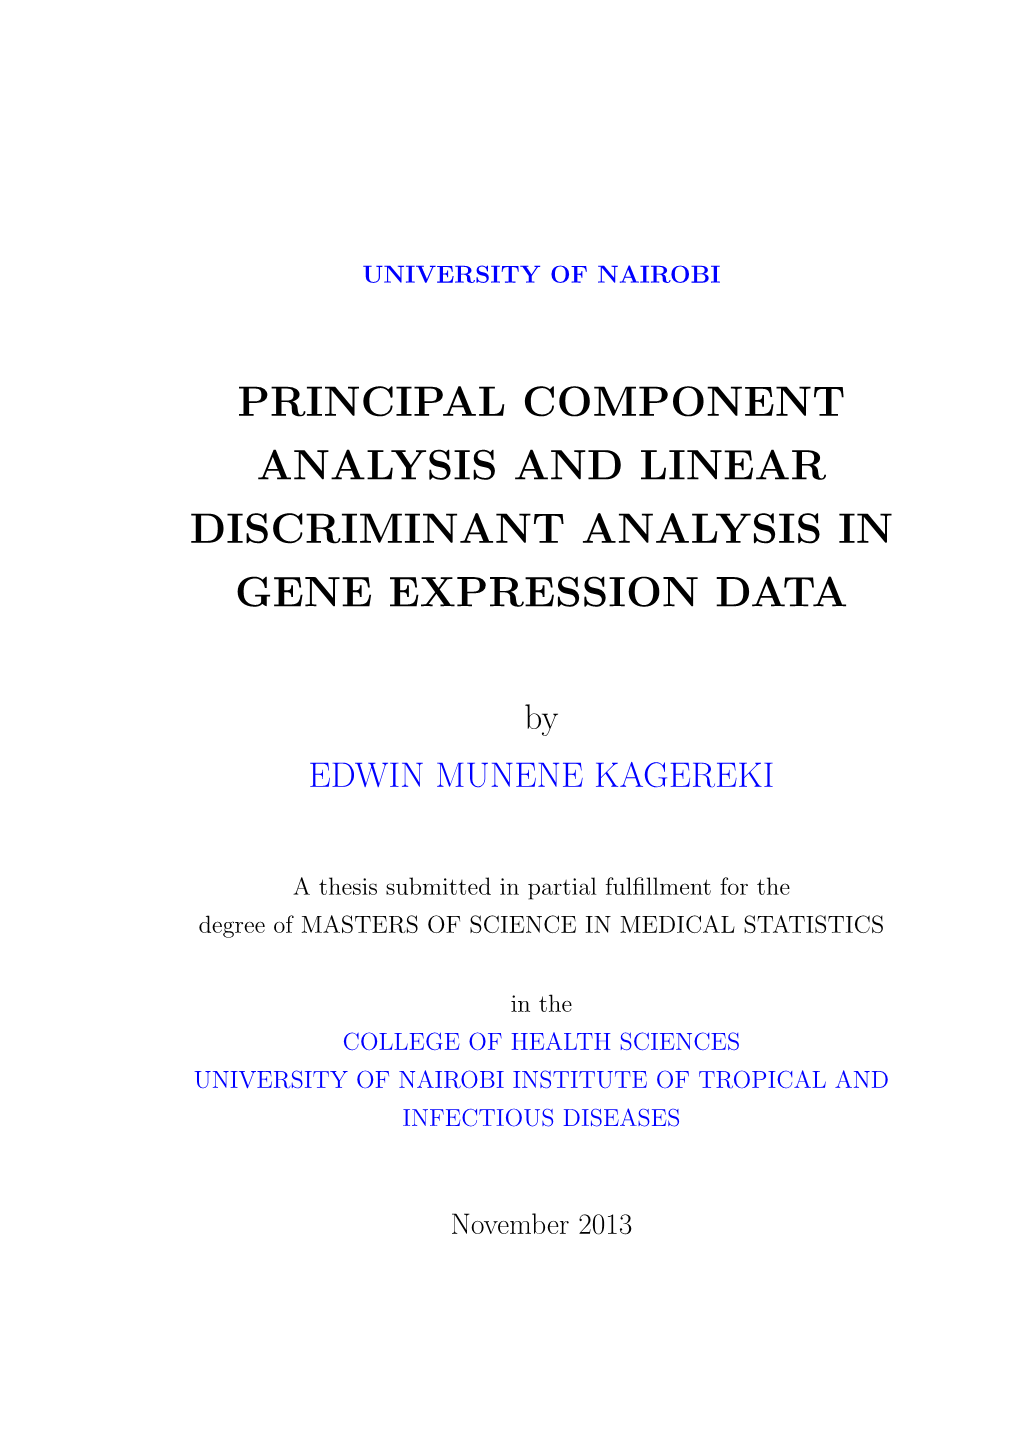 Principal Component Analysis and Linear Discriminant Analysis in Gene Expression Data